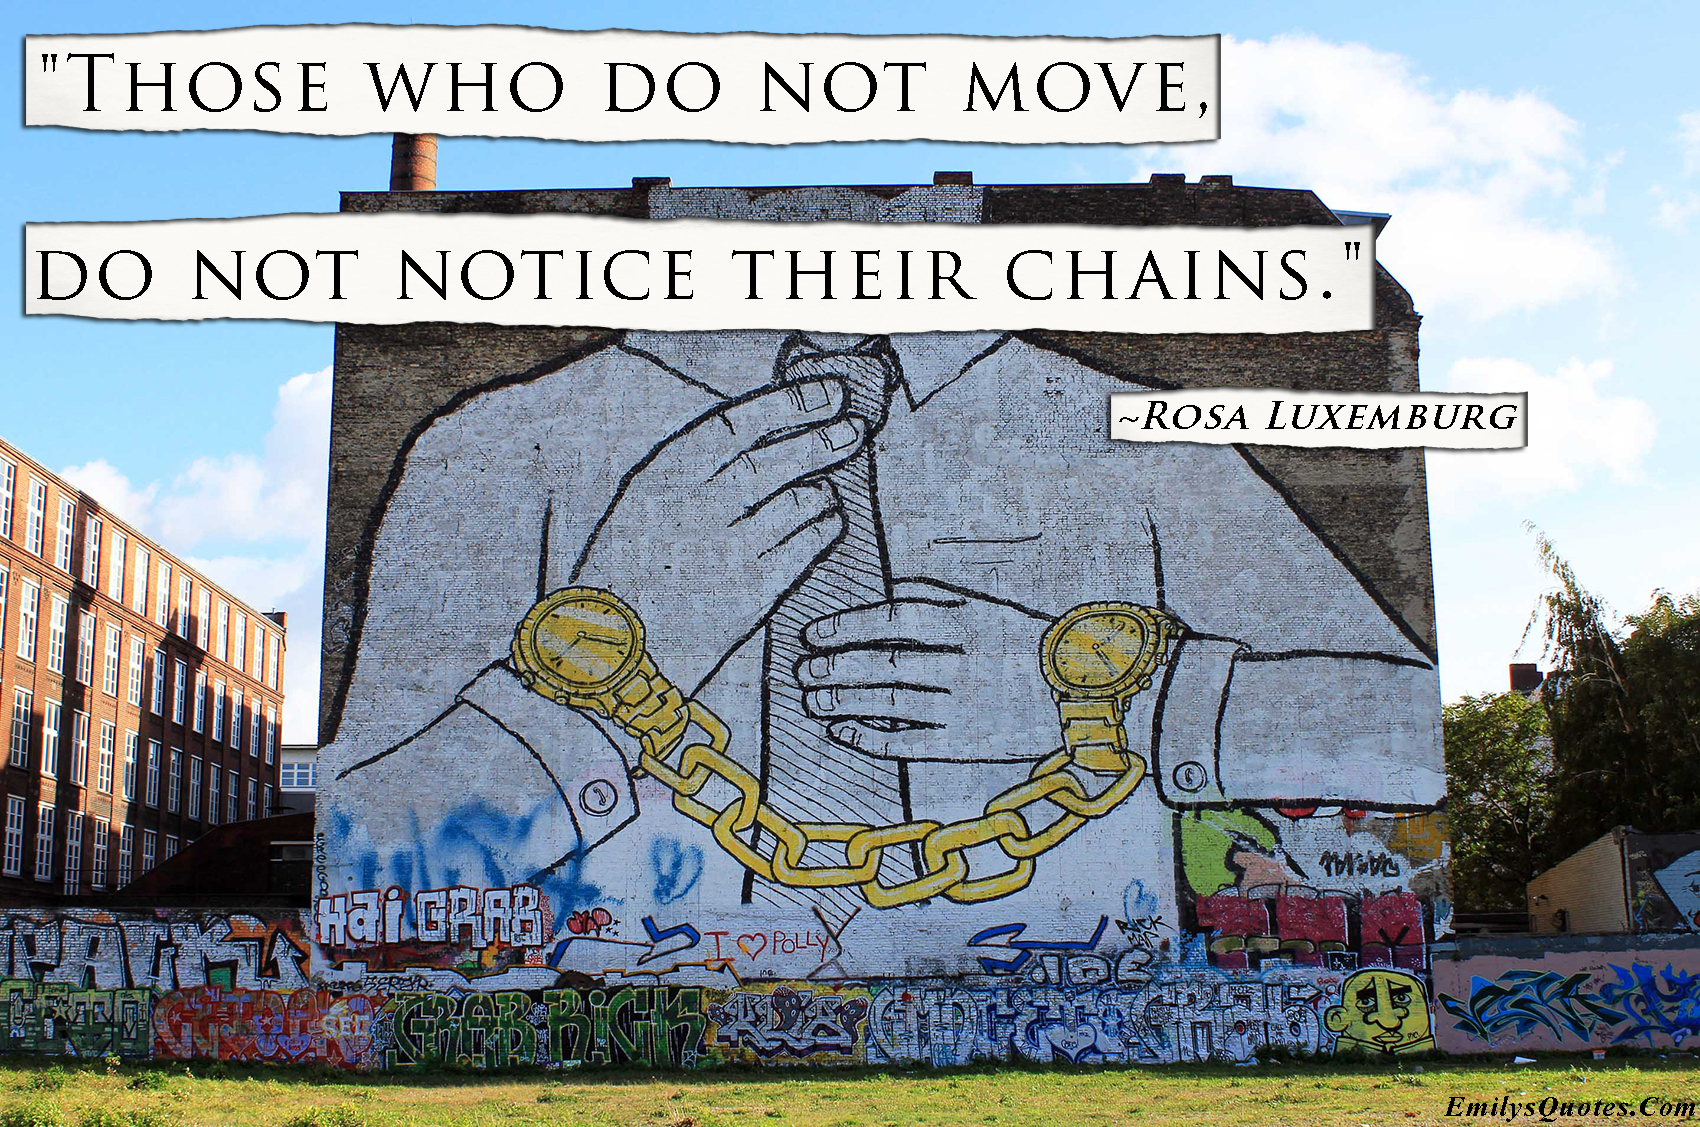 Those who do not move, do not notice their chains